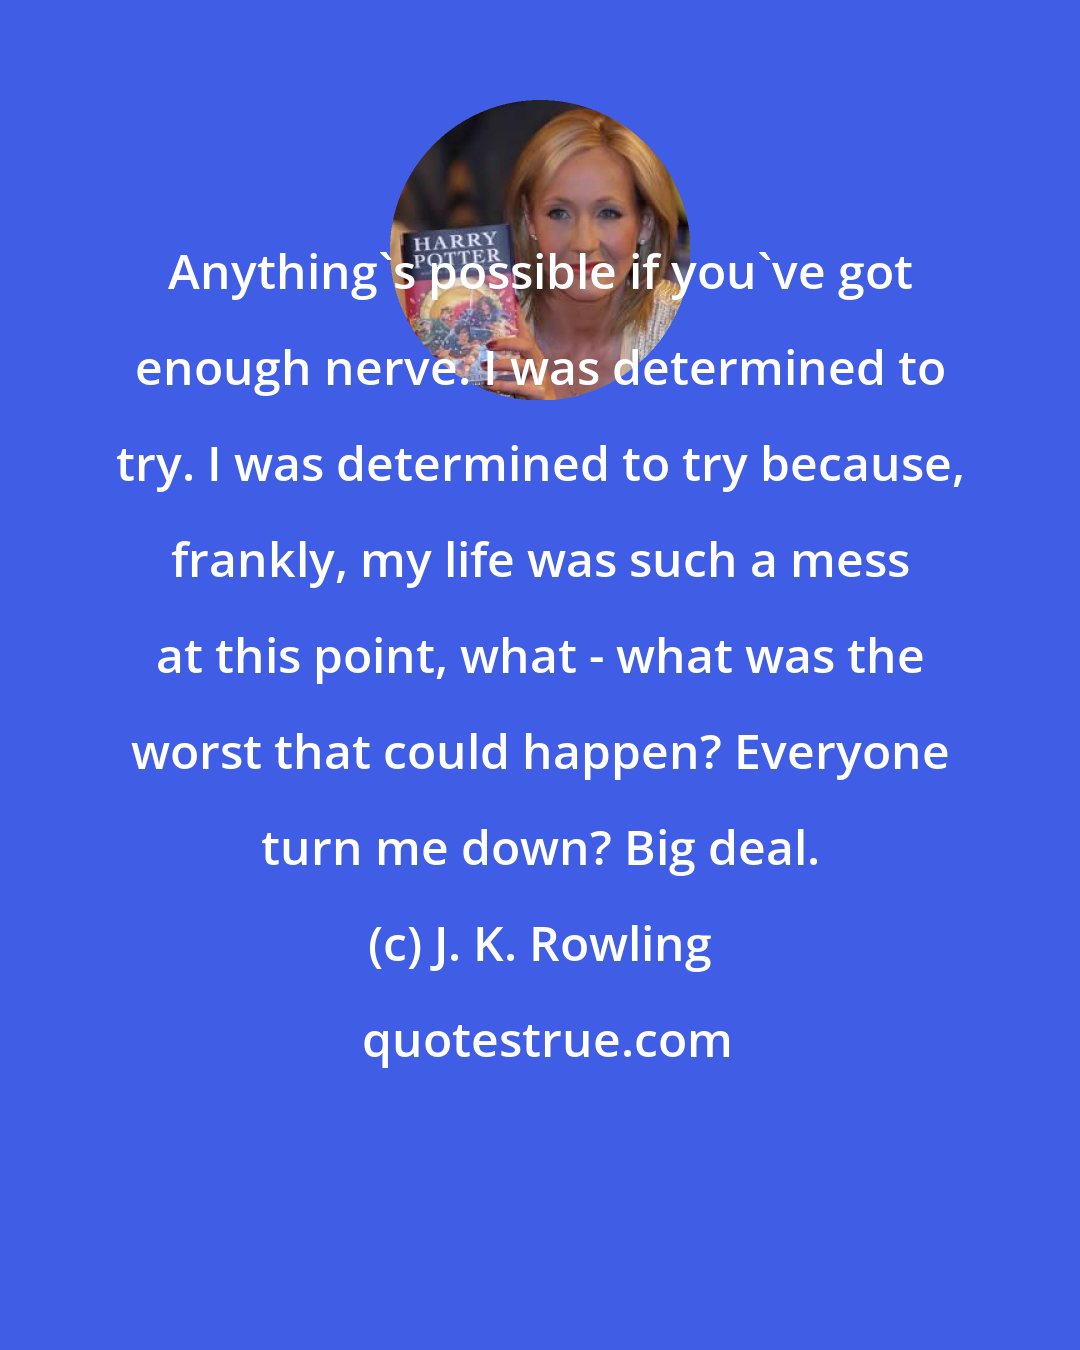 J. K. Rowling: Anything's possible if you've got enough nerve. I was determined to try. I was determined to try because, frankly, my life was such a mess at this point, what - what was the worst that could happen? Everyone turn me down? Big deal.